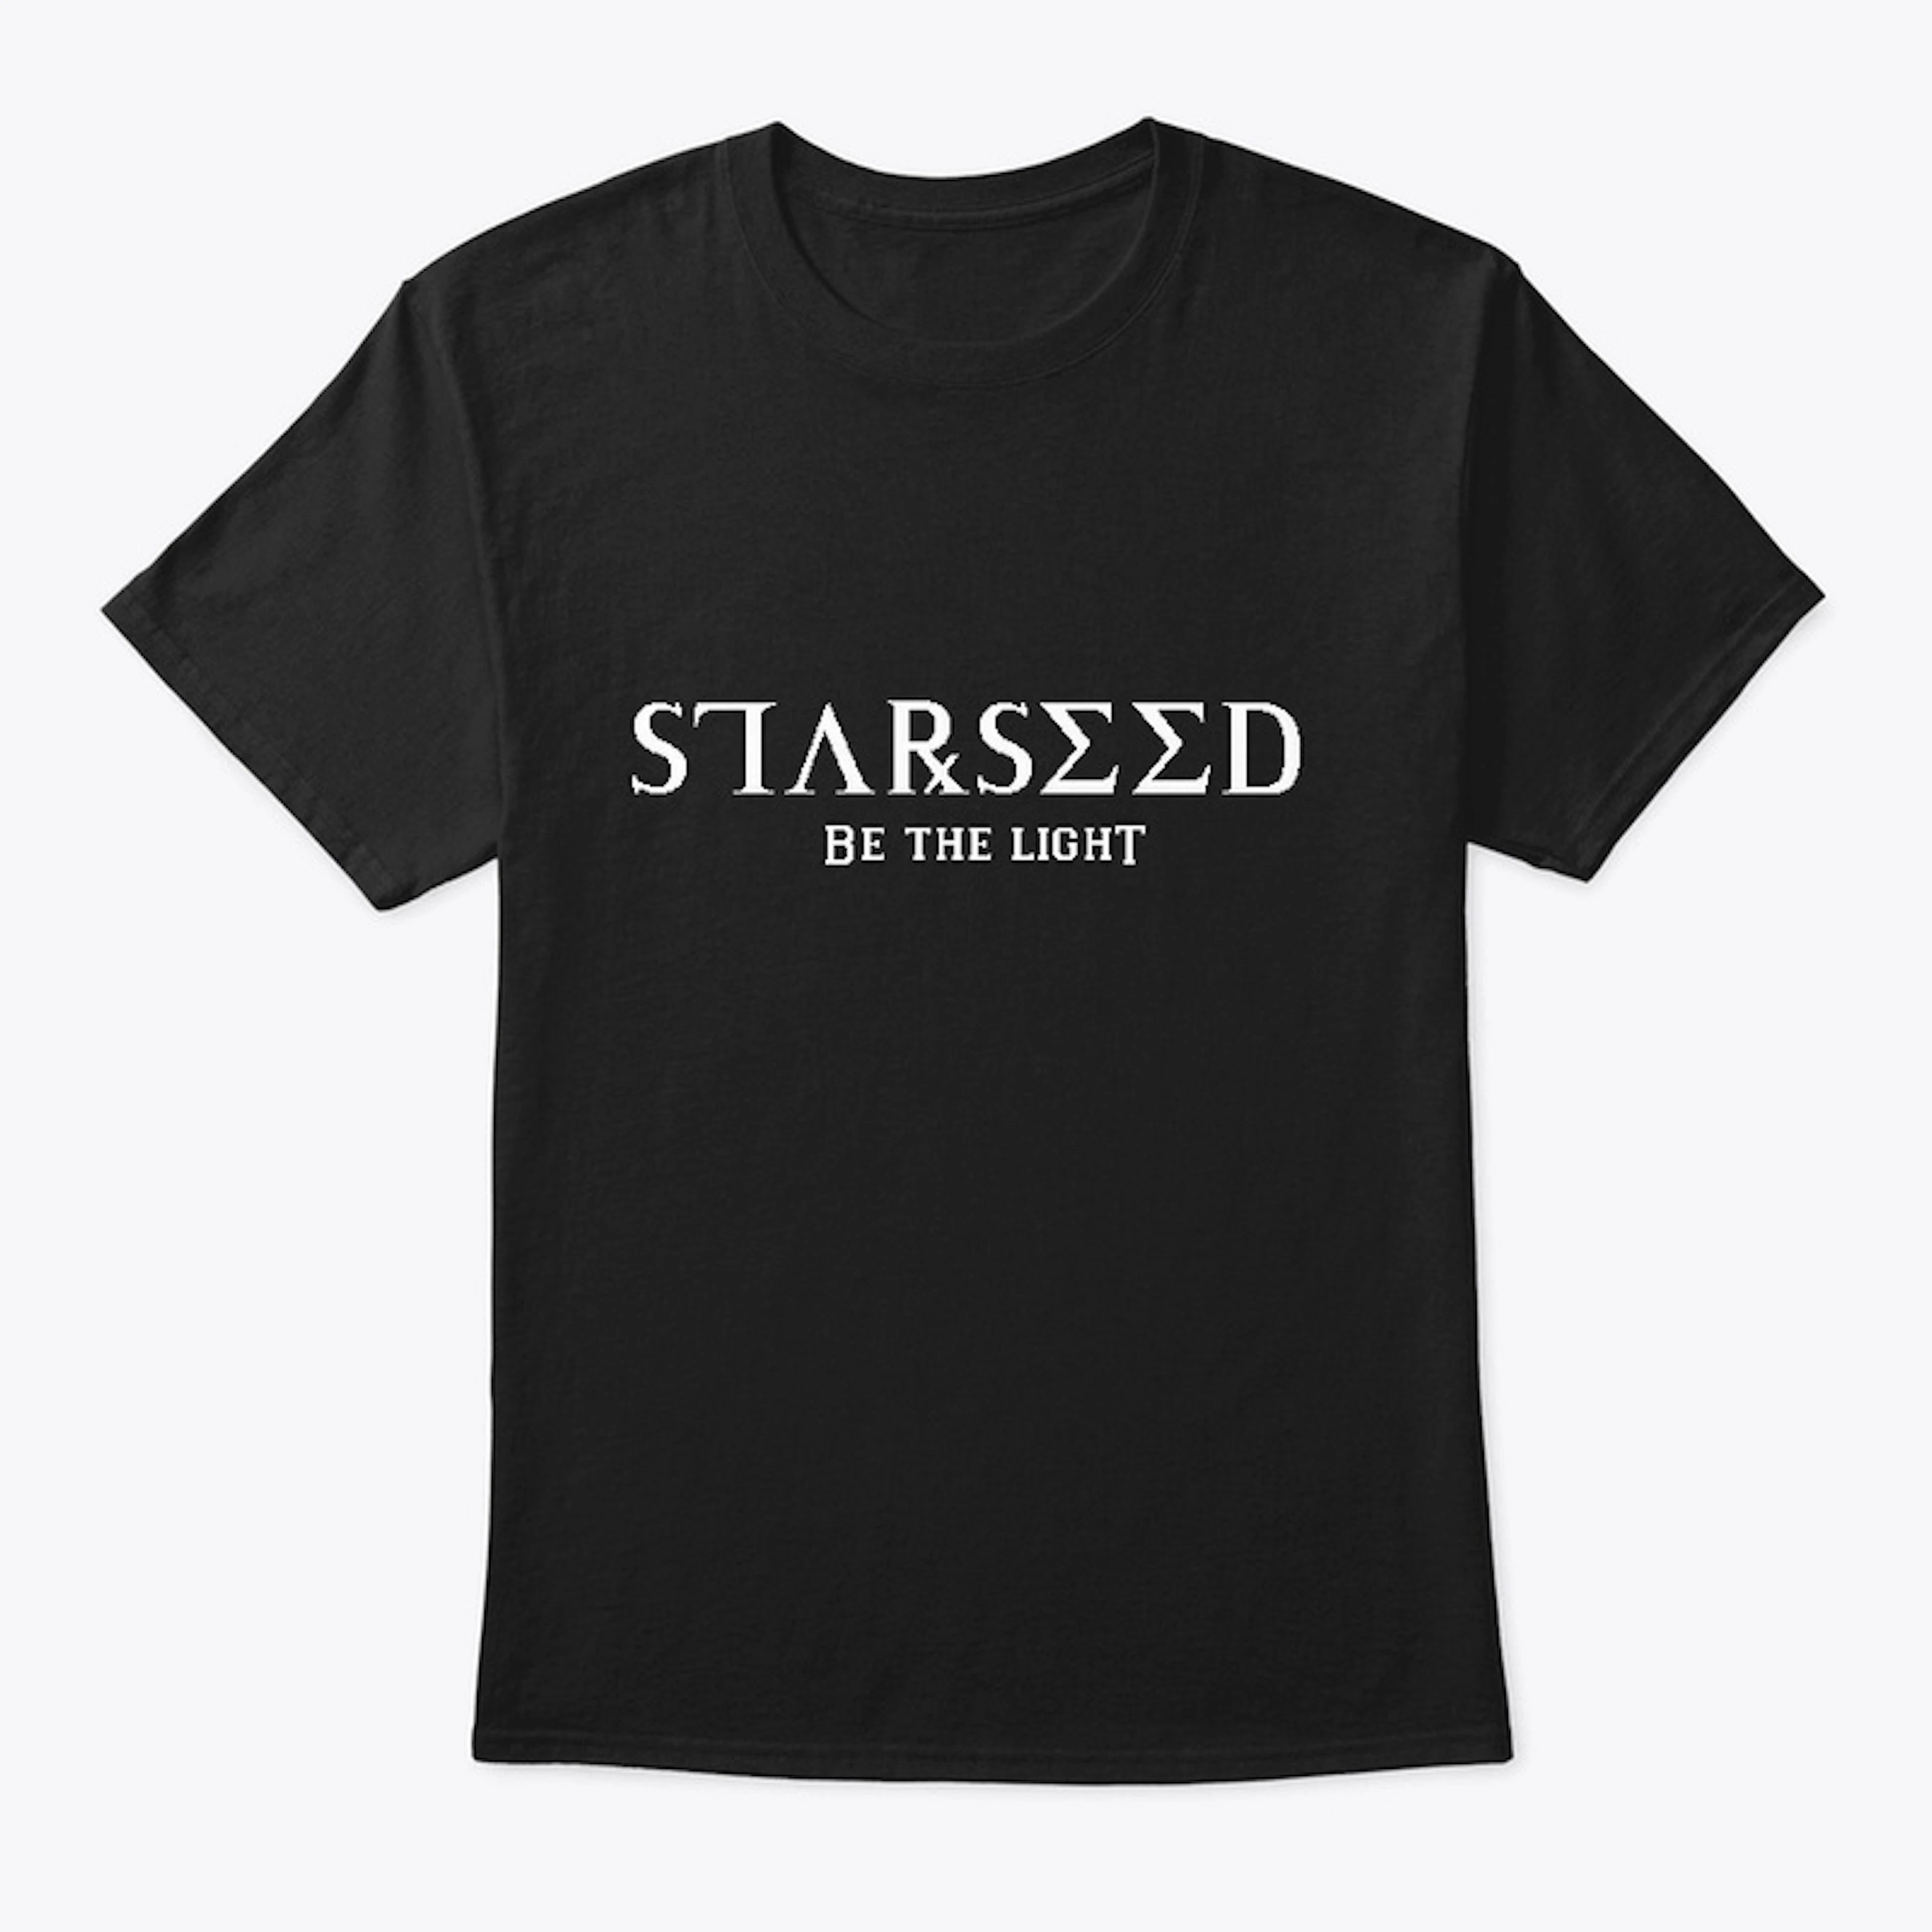 Starseed -Be the light